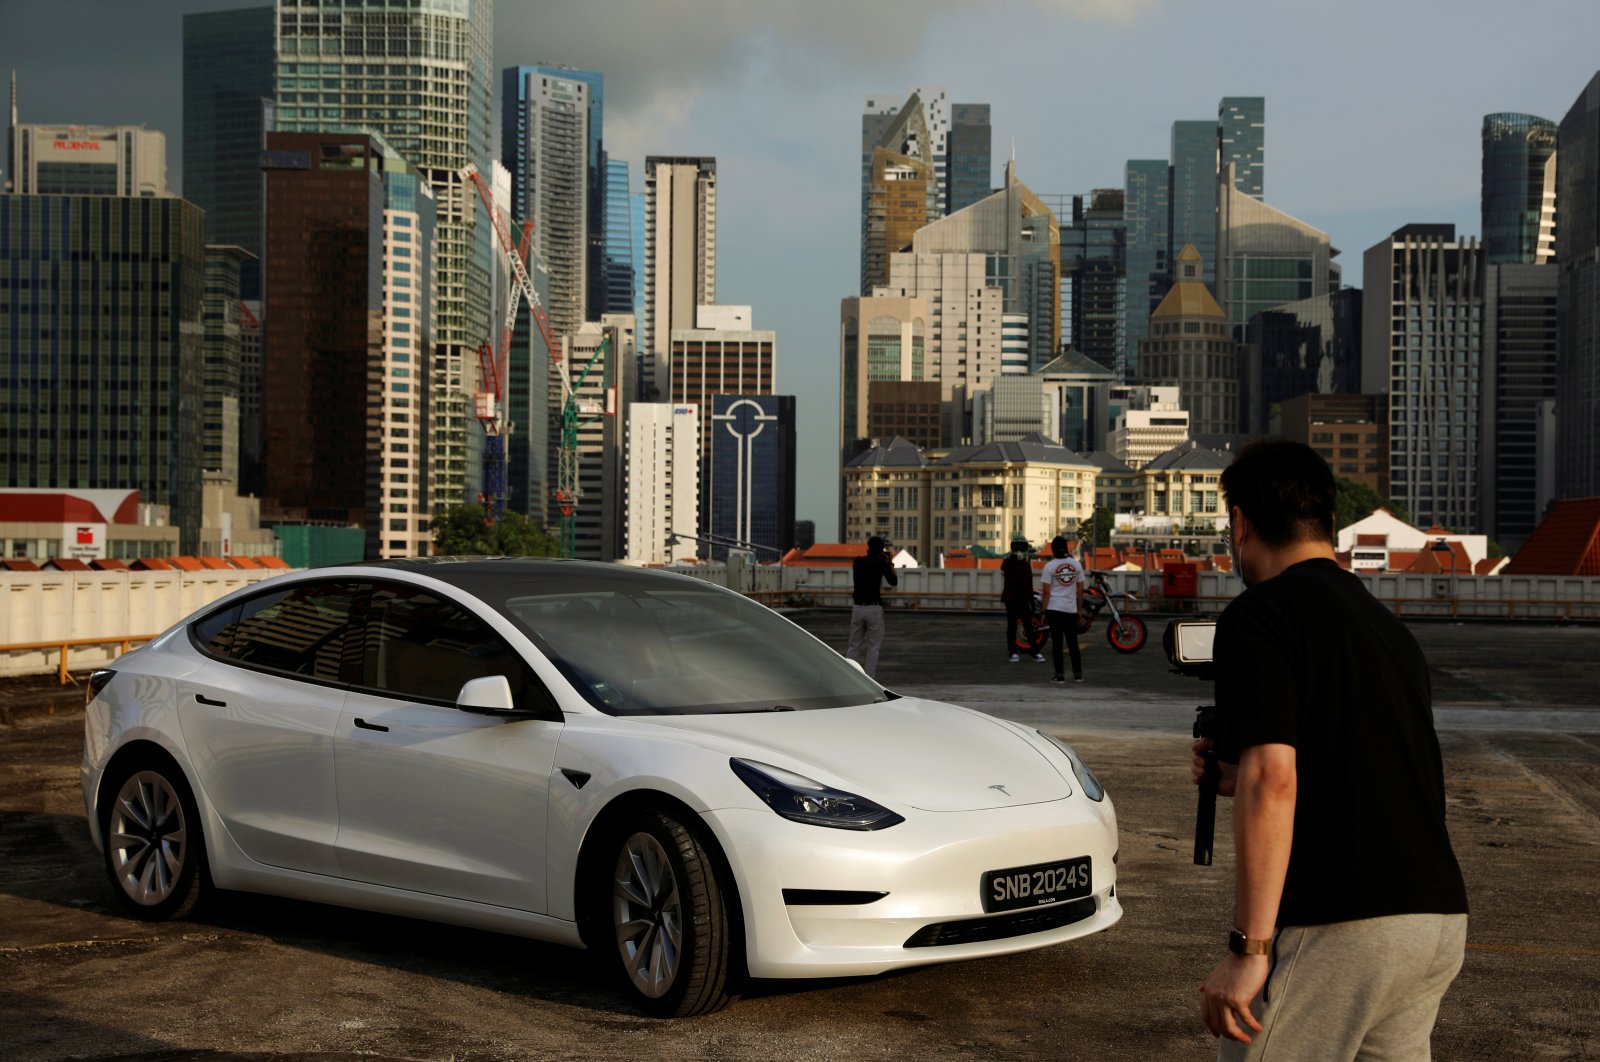 Tesla car owner Tim Shim, 42, films an "unboxing” video of his new Model 3 car in Singapore, Oct. 25, 2021. (Reuters Photo)